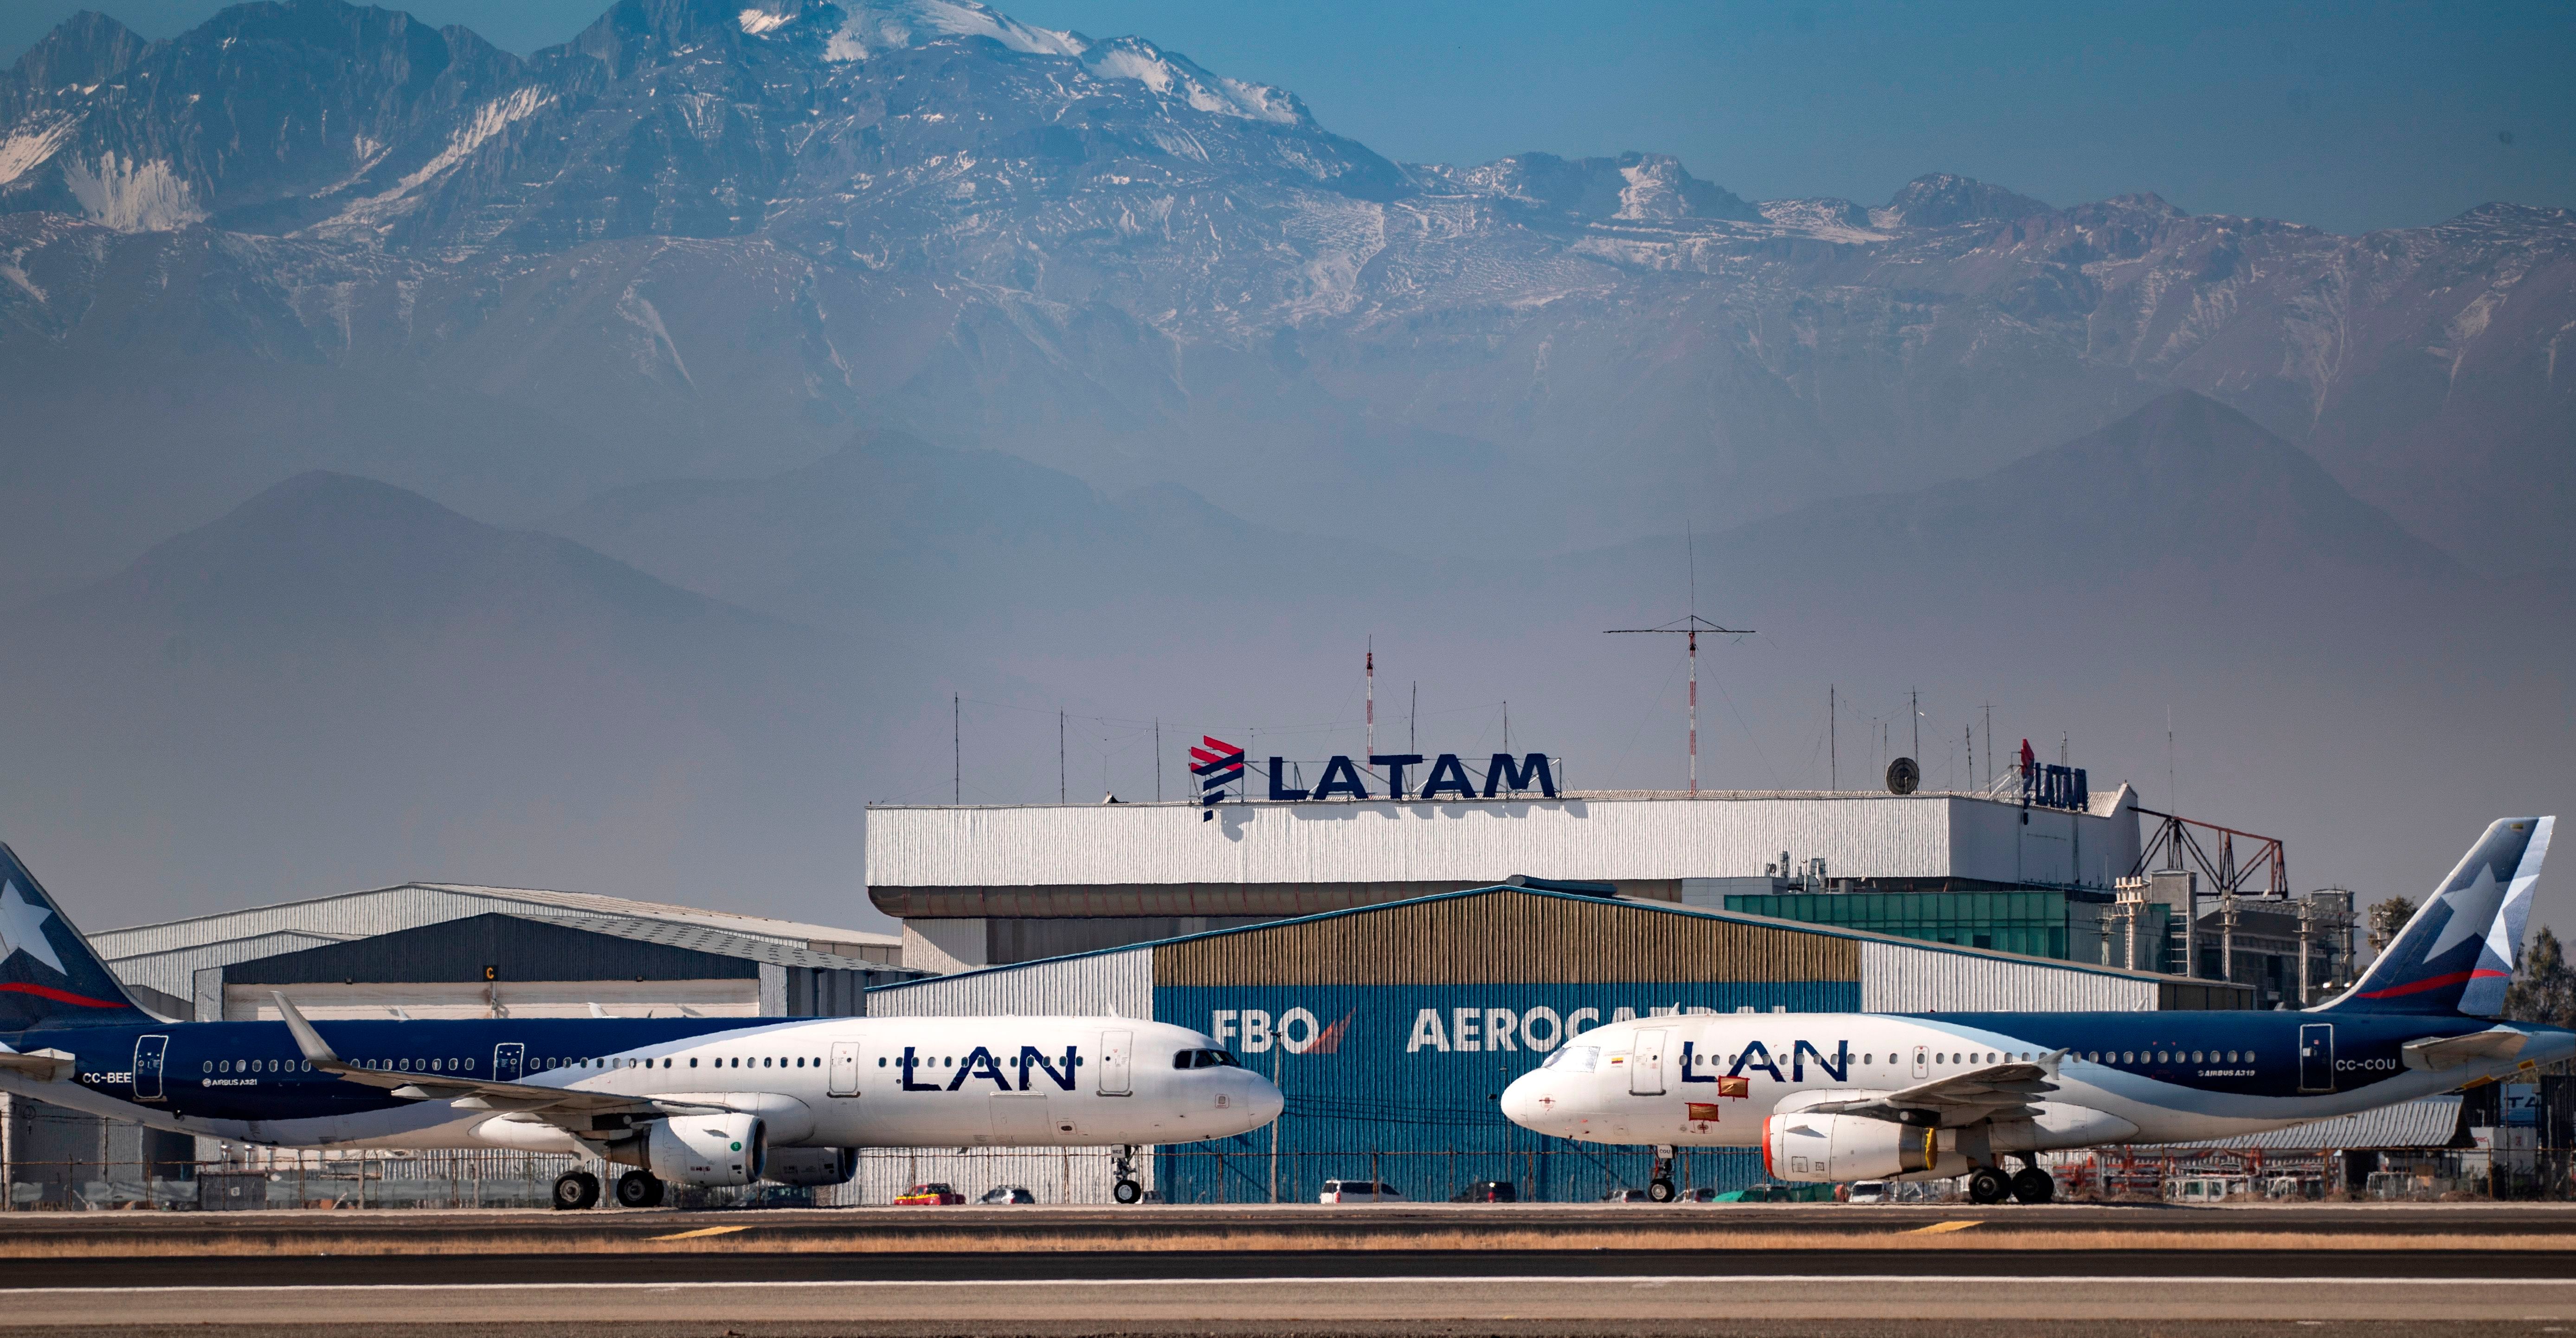 Latam airlines planes sit on the tarmac at Santiago International Airport